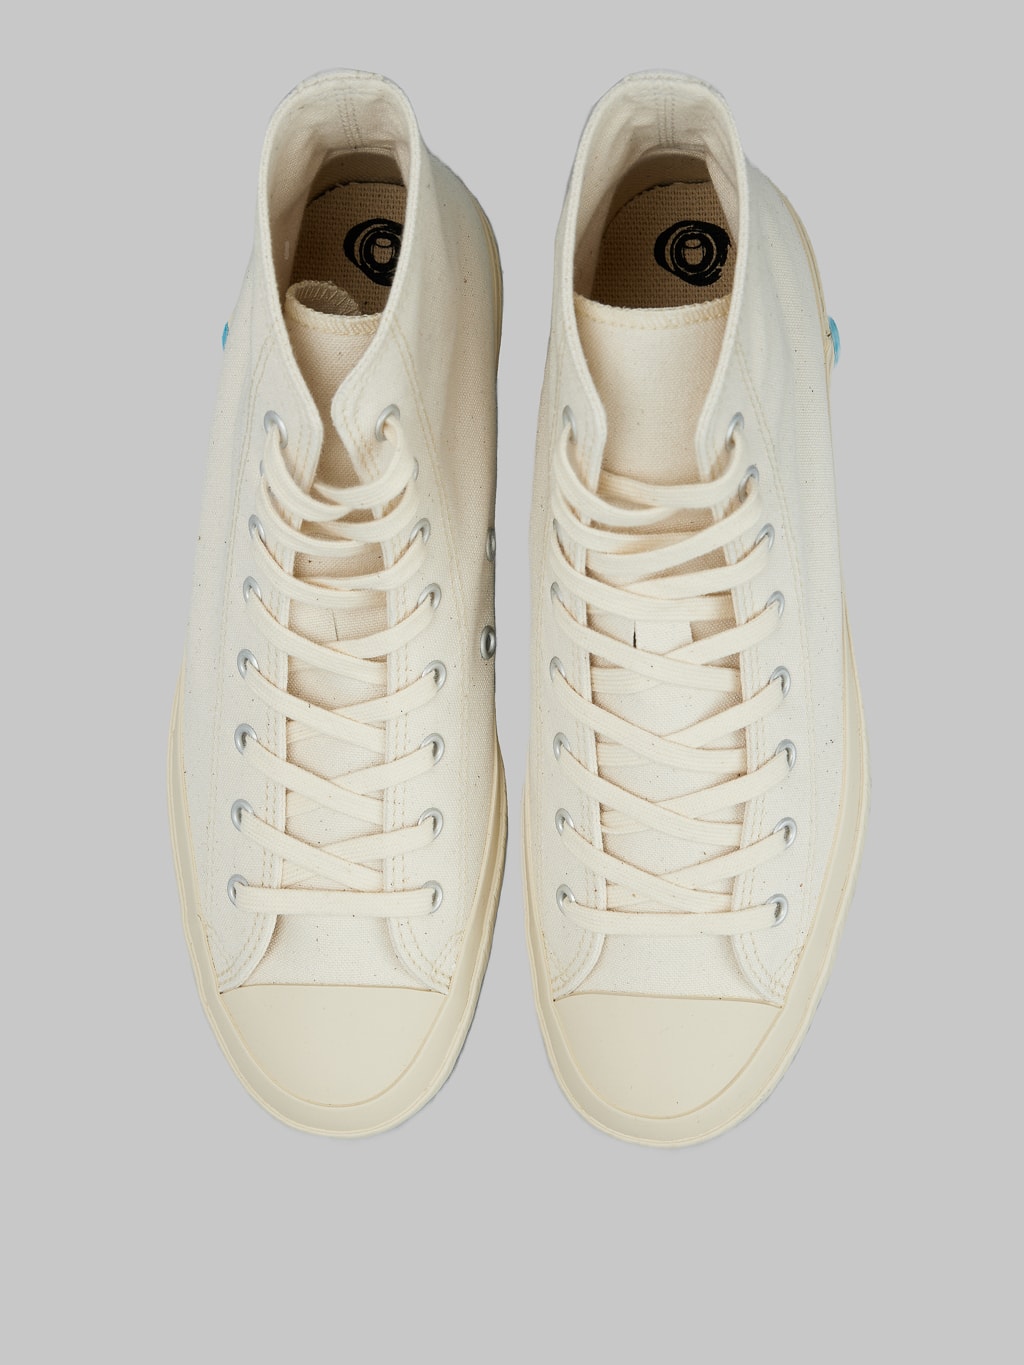 Shoes like pottery high sneaker white up view